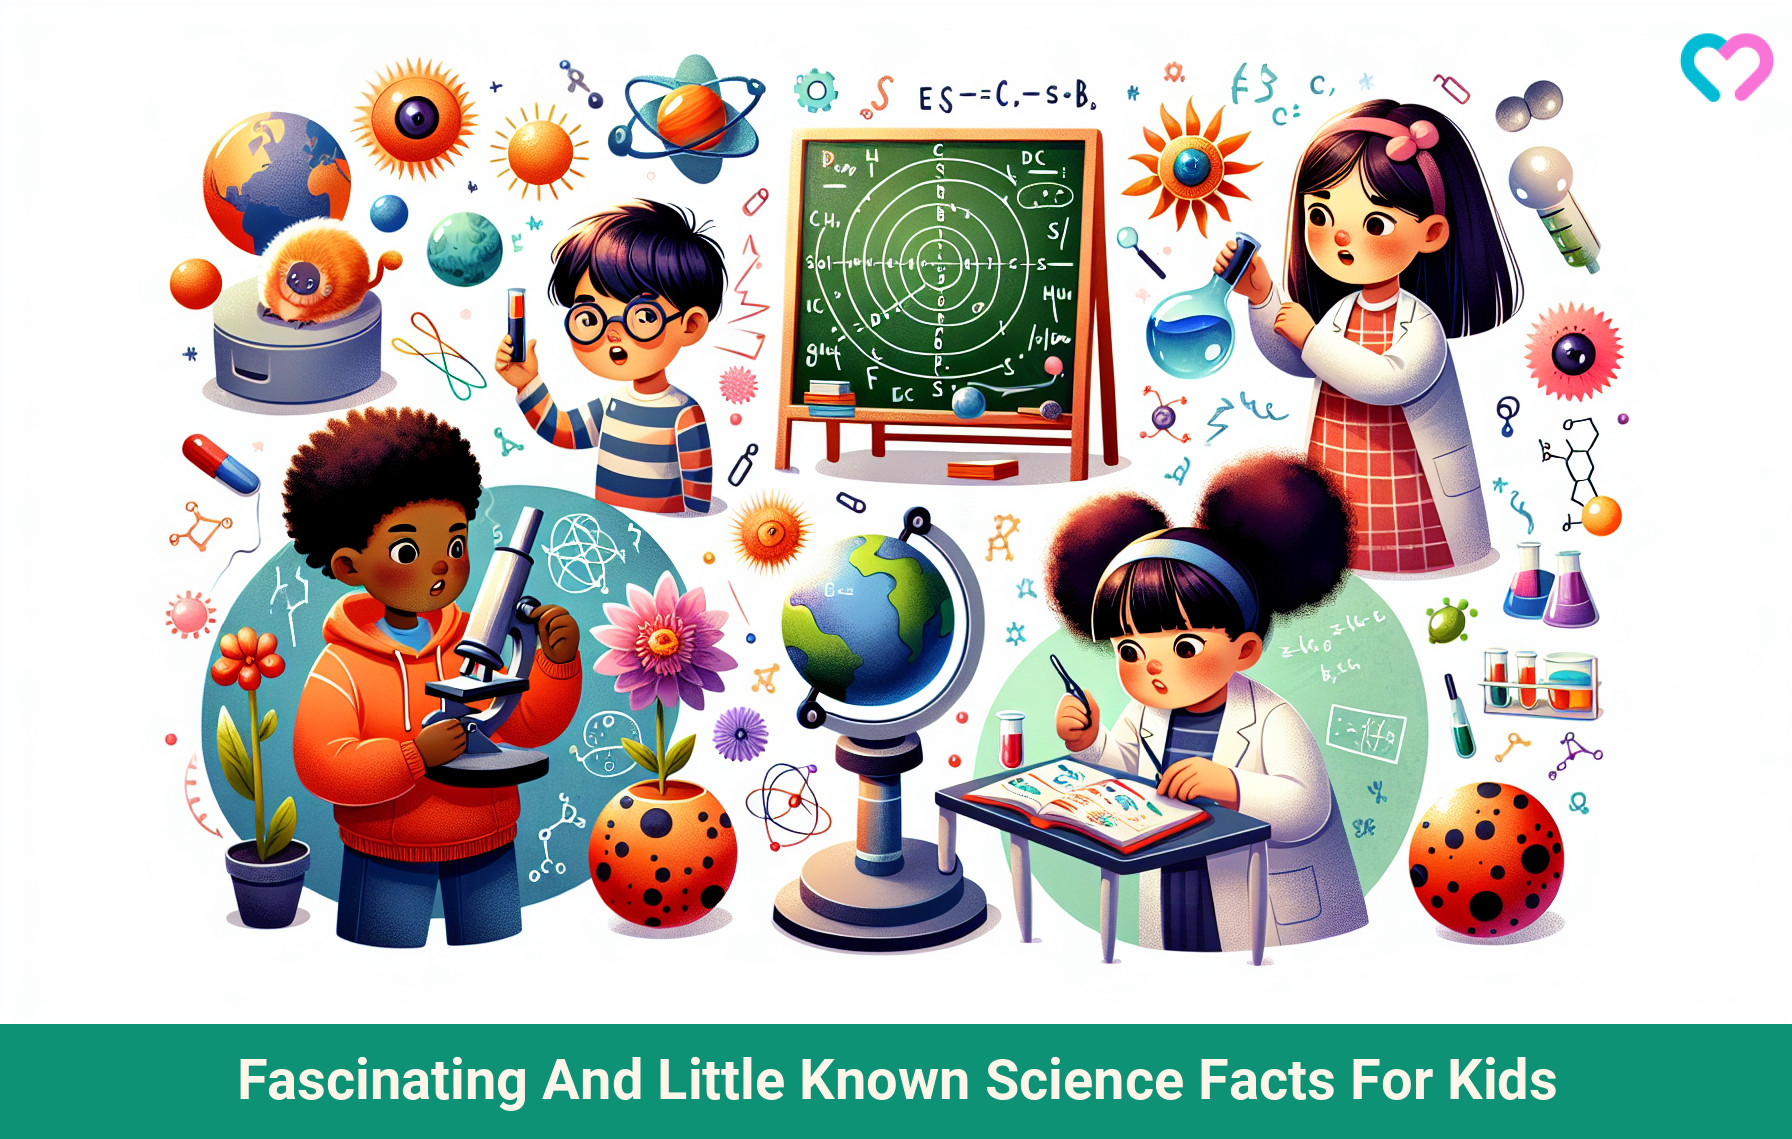 Science Facts For Kids_illustration